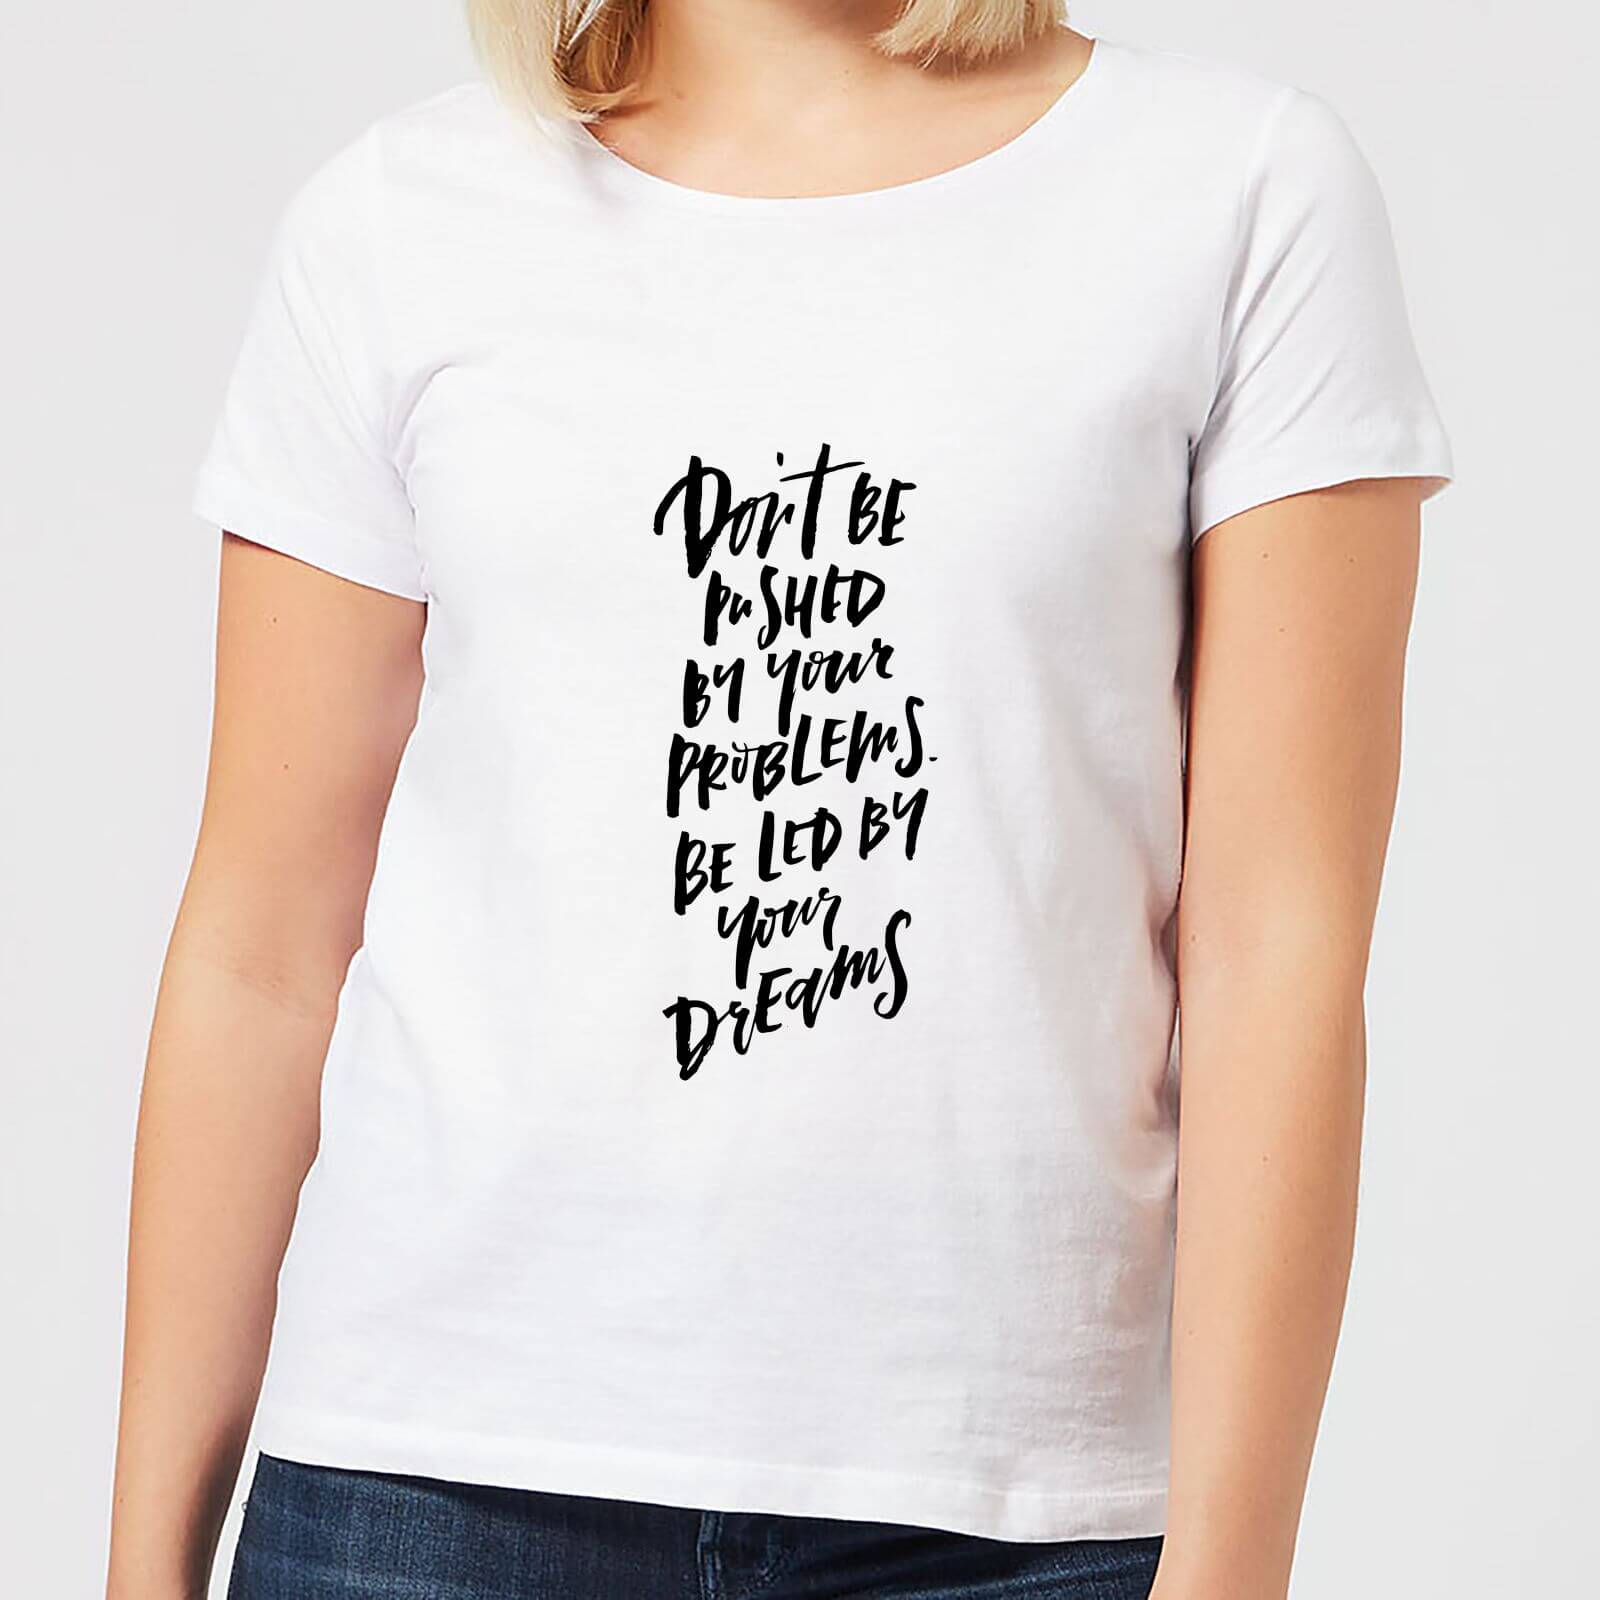 Don't Be Pushed By Your Problems Women's T-Shirt - White - S - White